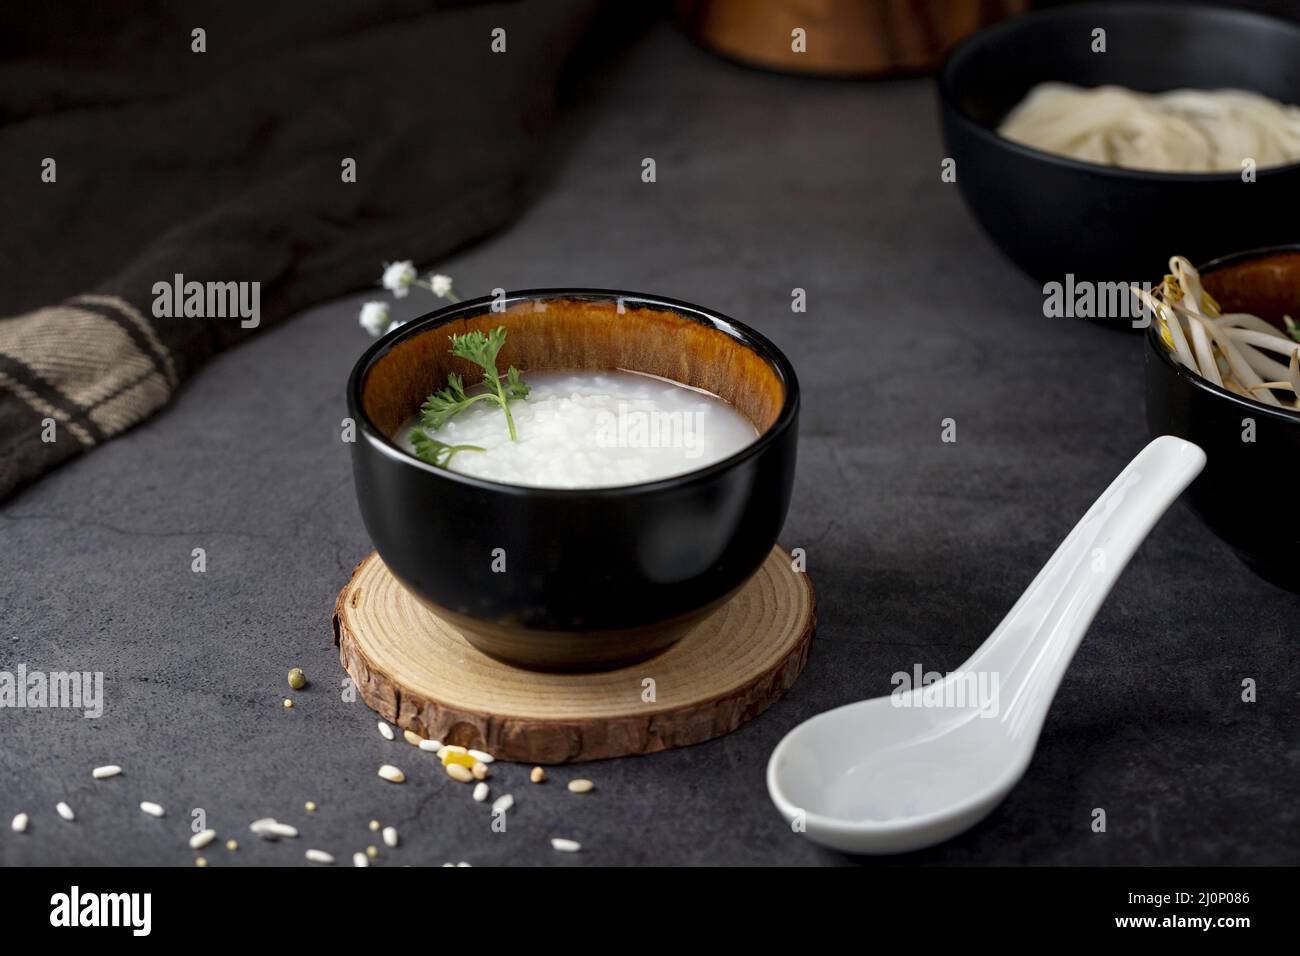 Rice soup black bowl wooden support white spoon . High quality and resolution beautiful photo concept Stock Photo